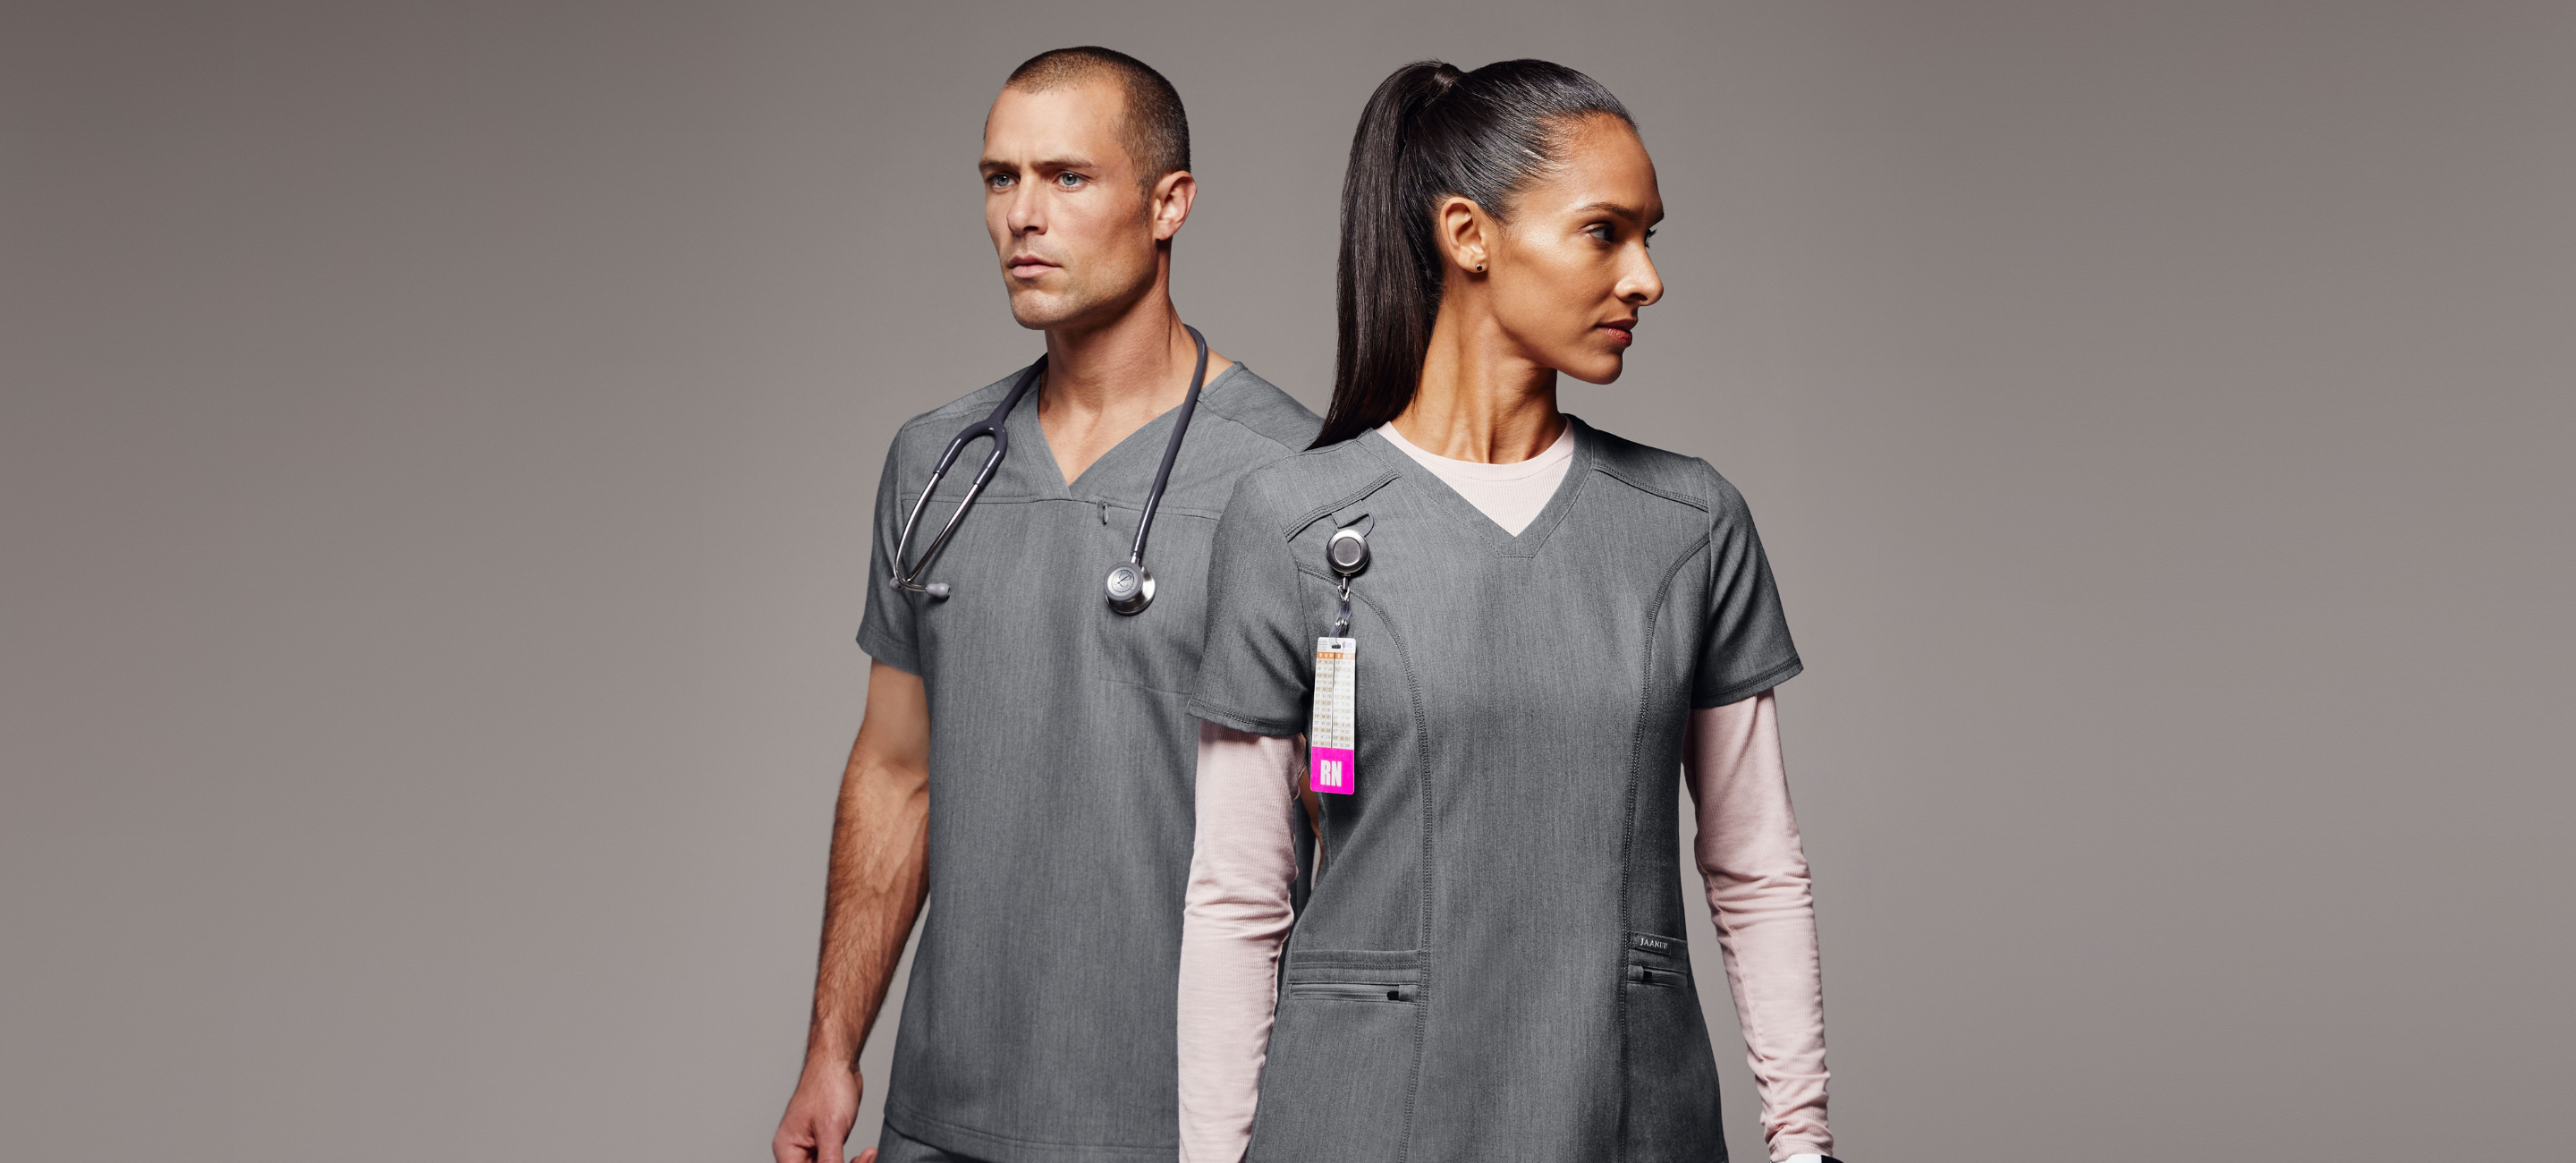 https://www.jaanuu.com/blog/wp-content/uploads/2021/11/Man-and-woman-with-grey-scrubs.png